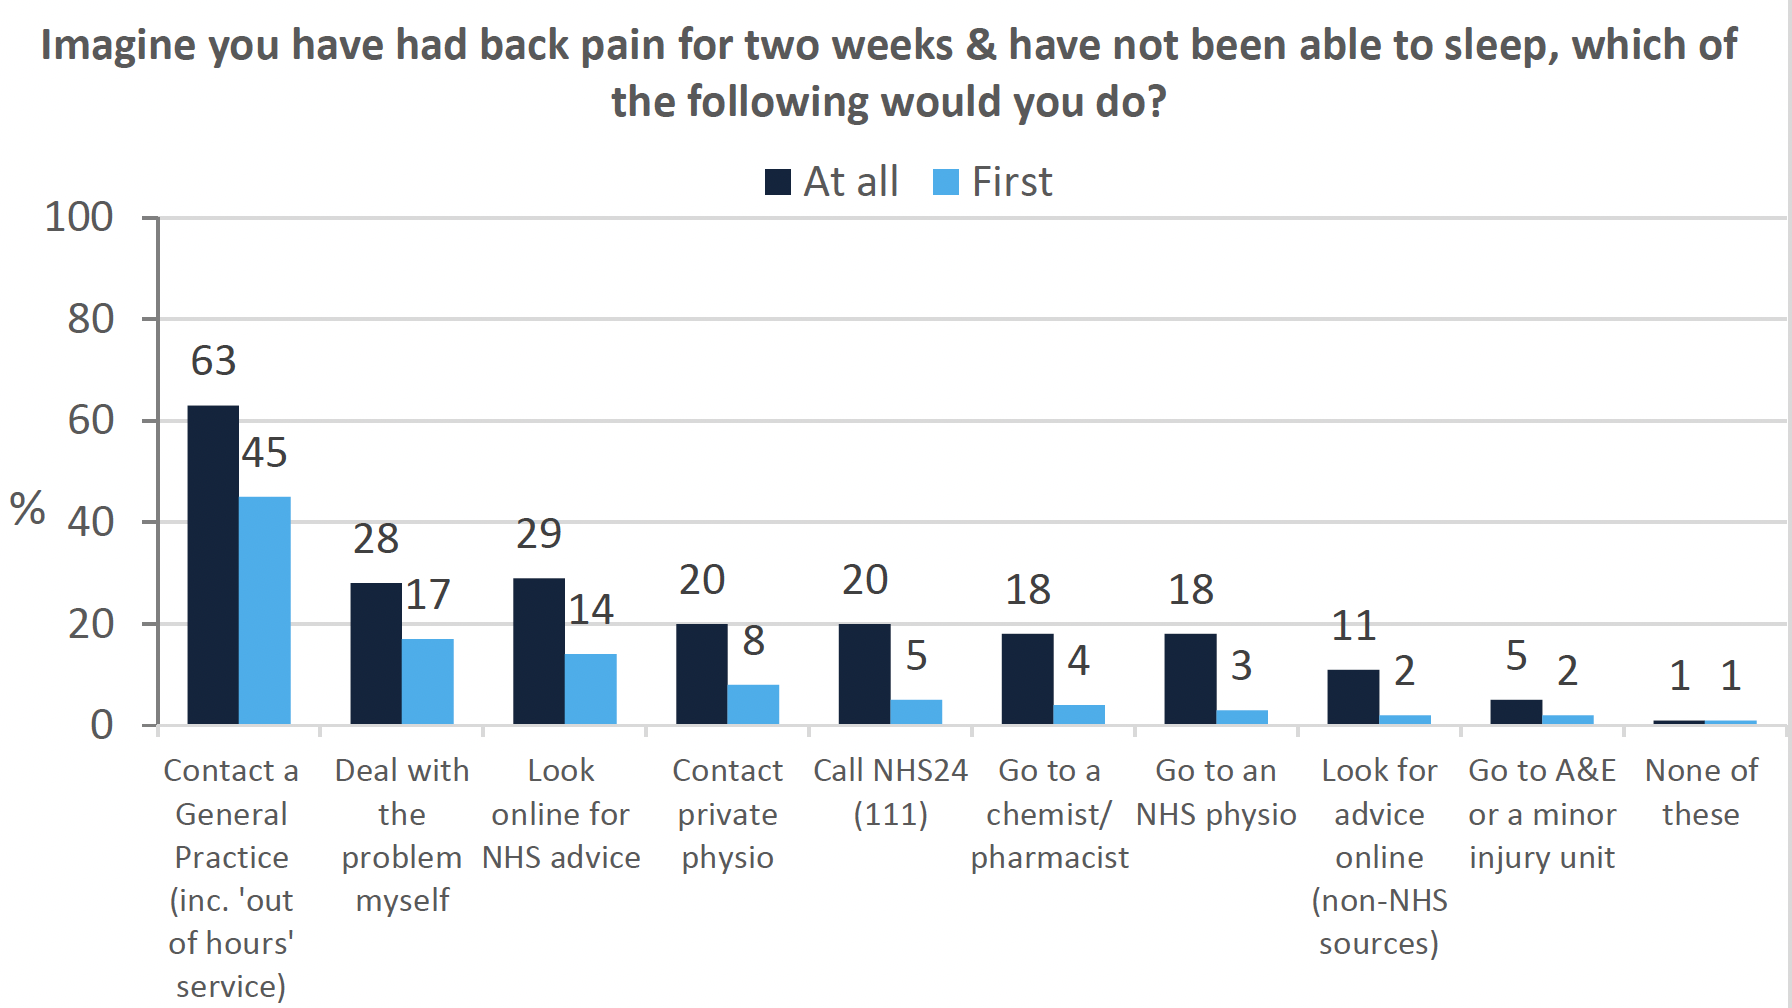 Multiple vertical bar graph showing responses to a scenario related to back pain and how people would use services
A multiple vertical bar graph that shows what respondents would do if they had back pain for two weeks and had not been able to sleep. Respondents could chose ‘at all’ or ‘first’ for each scenario. Participants could choose more than one option for the “at all” response. In descending order the responses were Contact a General Practice (including out of hours), Deal with the problem myself, Look online for NHS advice, Contact private physio, Call NHS24 (111), Go to a chemist/pharmacist, Go to an NHS physio, Look for advice online (non-NHS sources), Go to A&E or a minor injury unit, and None of these.